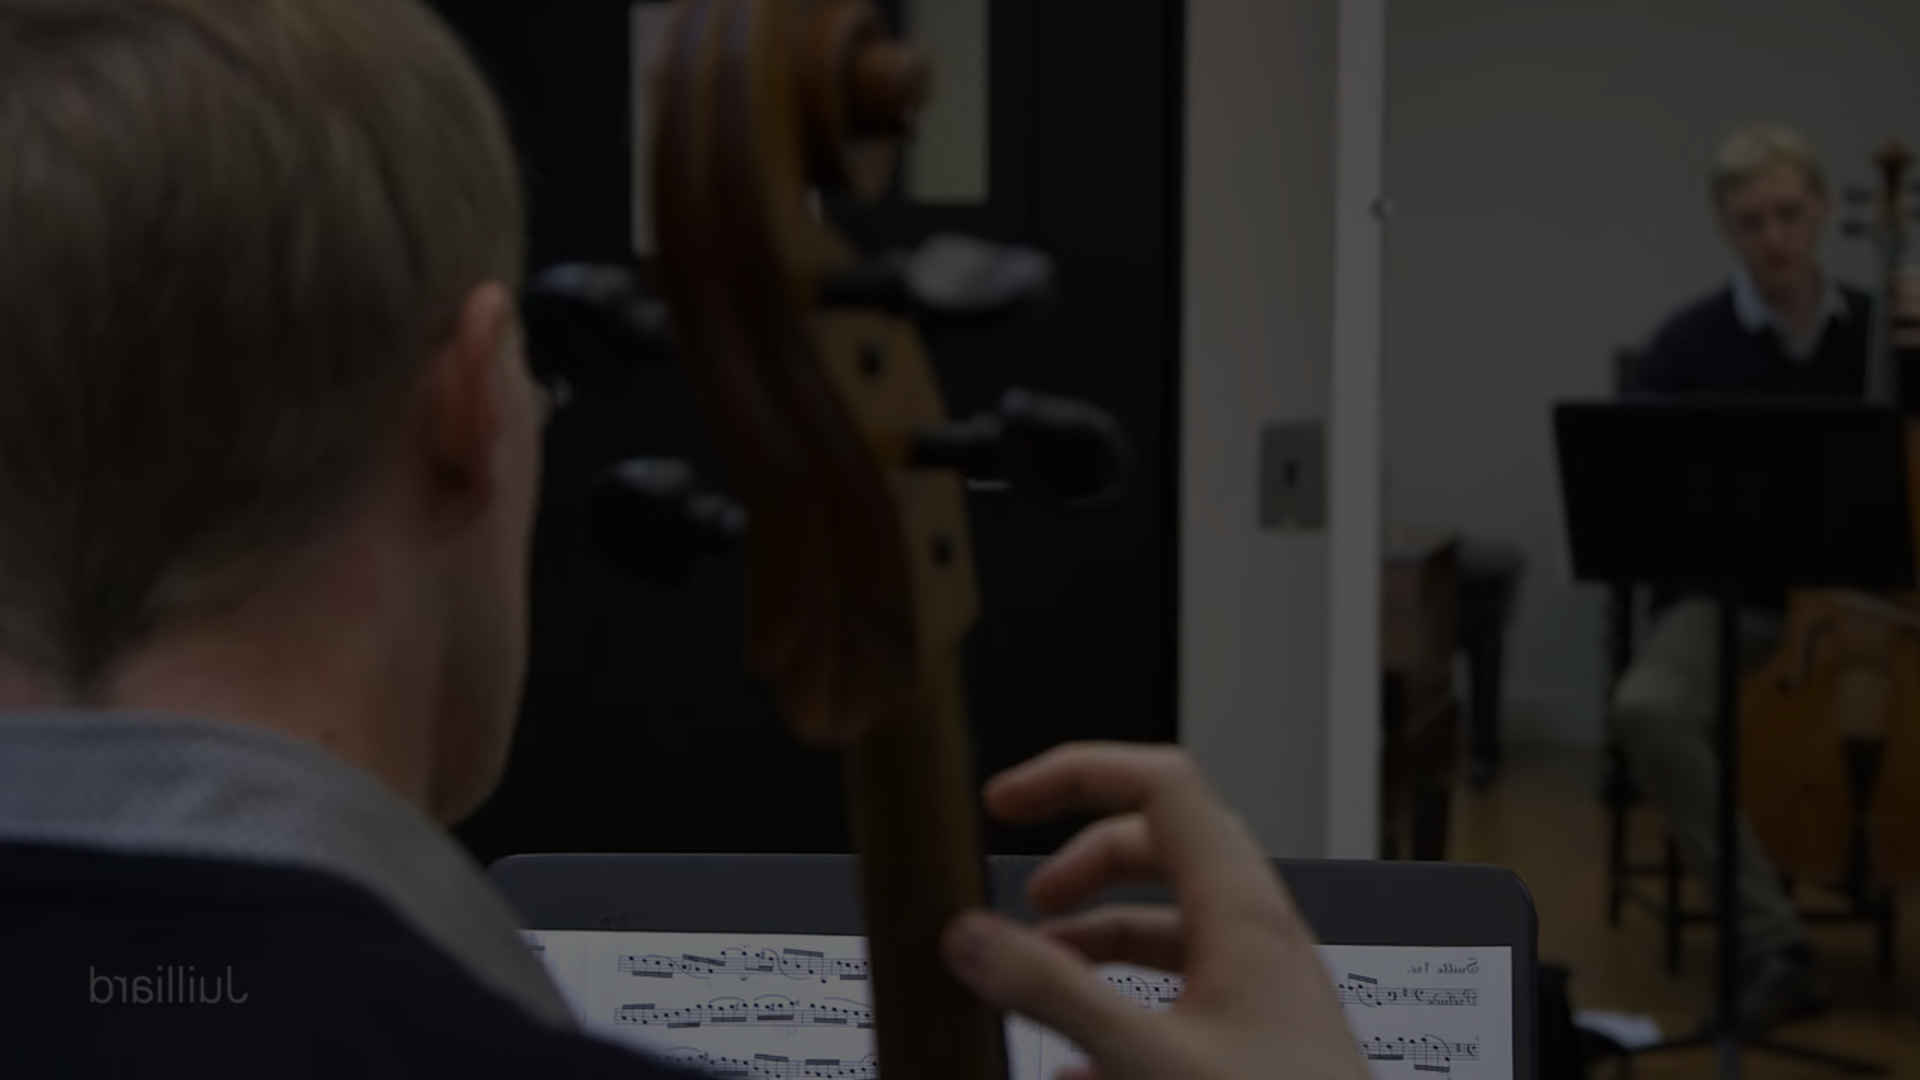 Video feature on a day in the life of Juilliard 历史性能 student Alex和er Nicholls